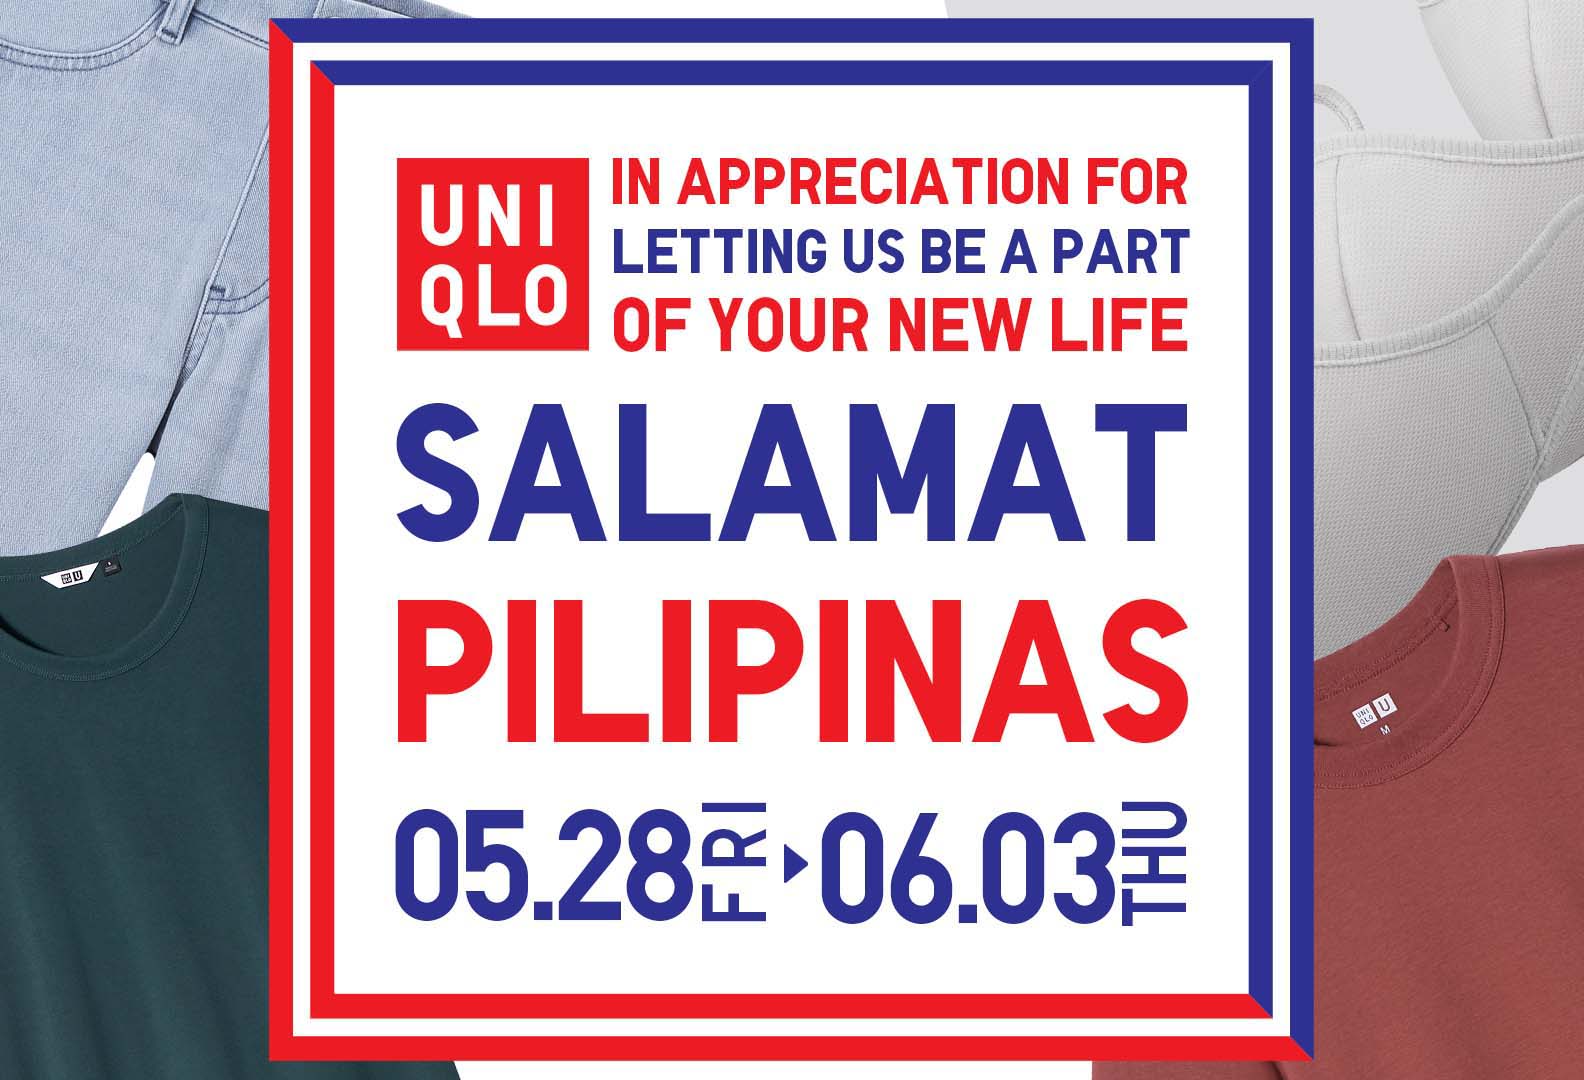 UNIQLO Philippines celebrates its 9th Anniversary with exclusive offers and promotions